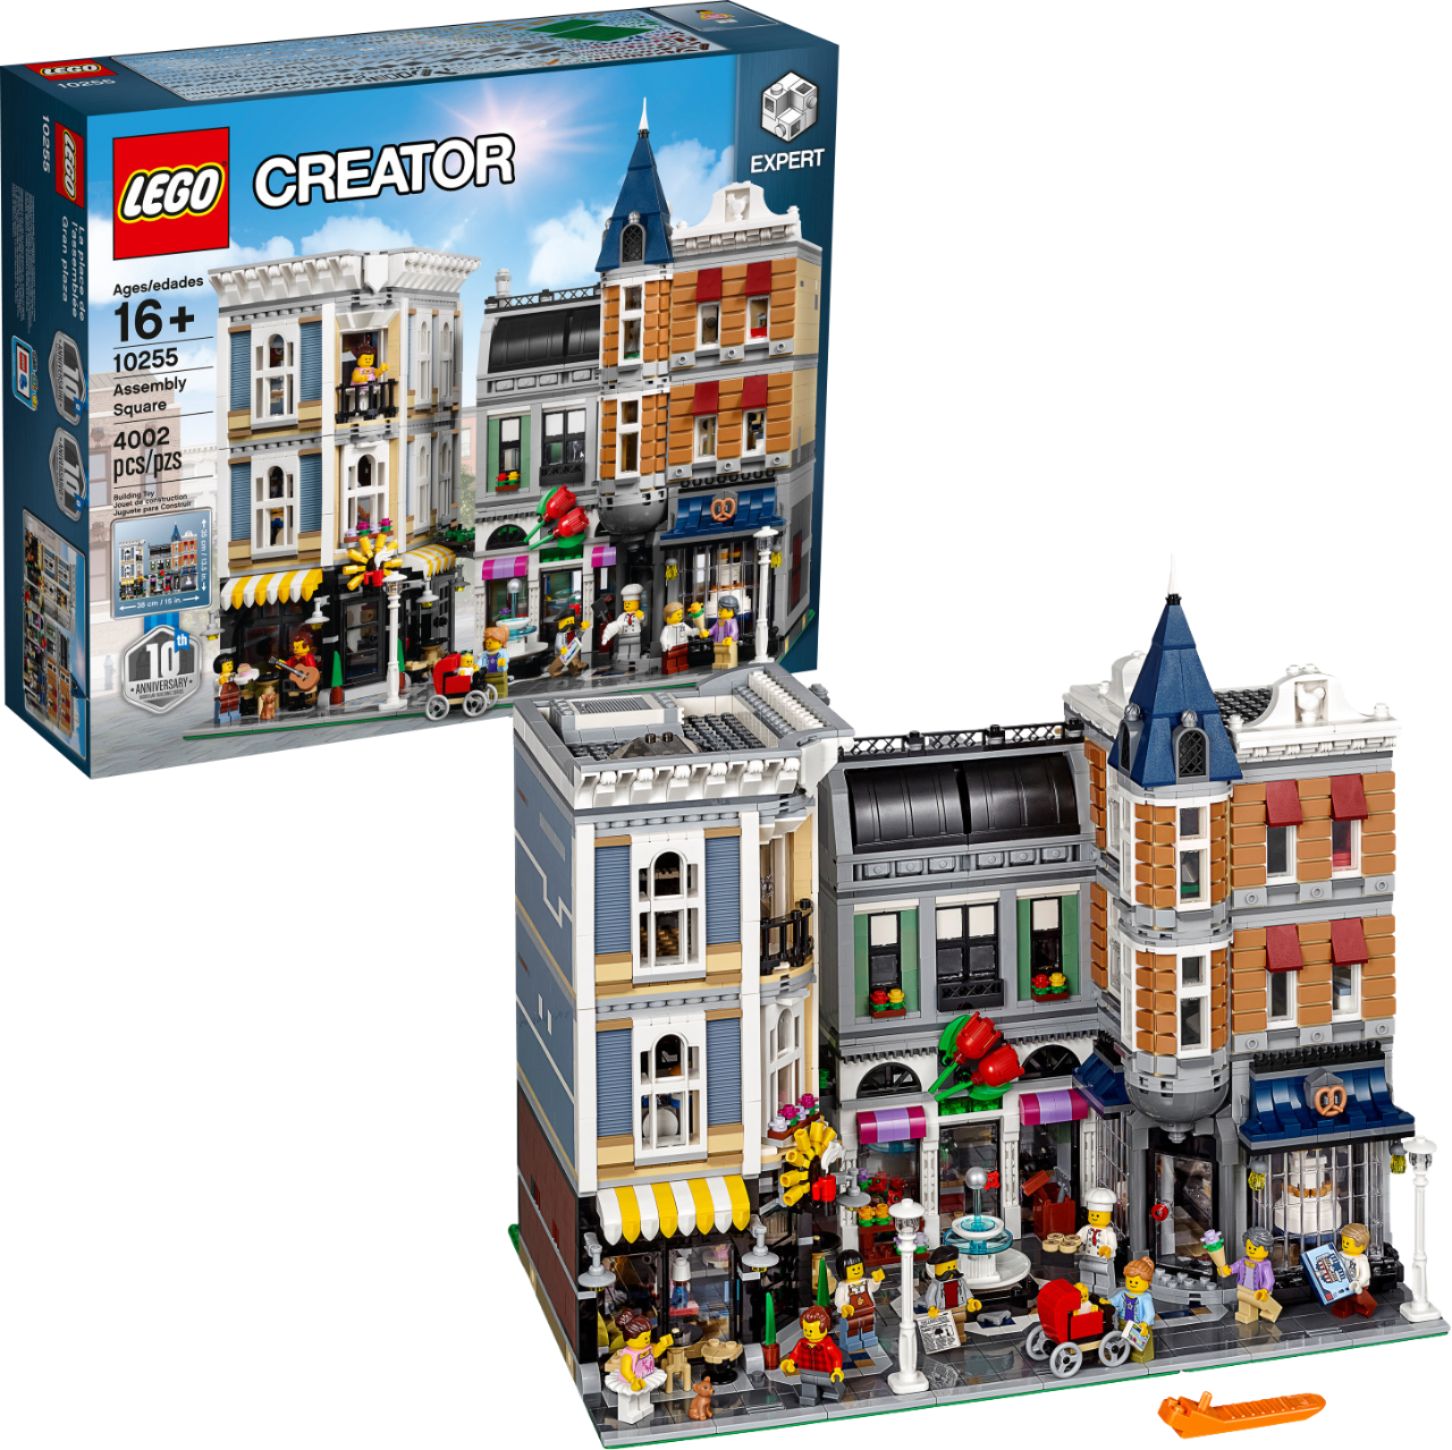 LEGO Creator Assembly Square 10255 - Best